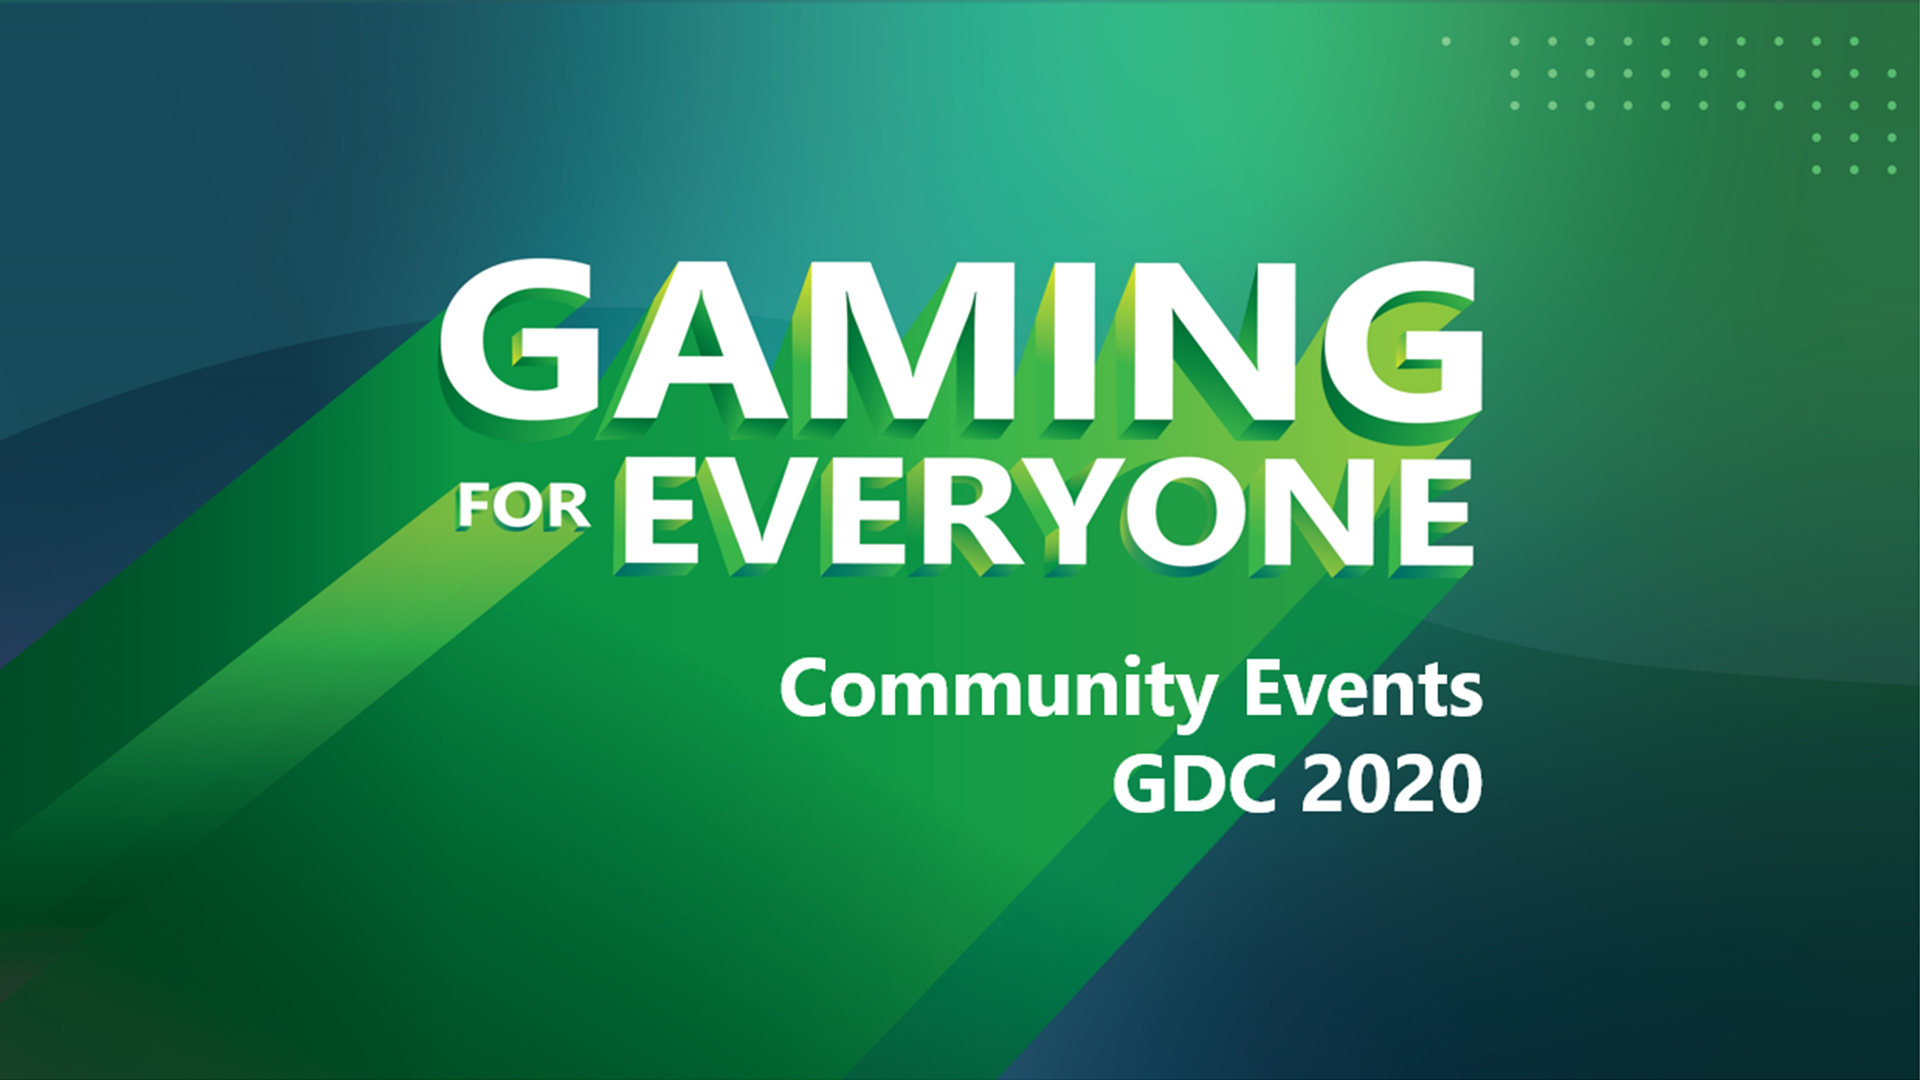 GDC 2020 - Gaming for Everyone